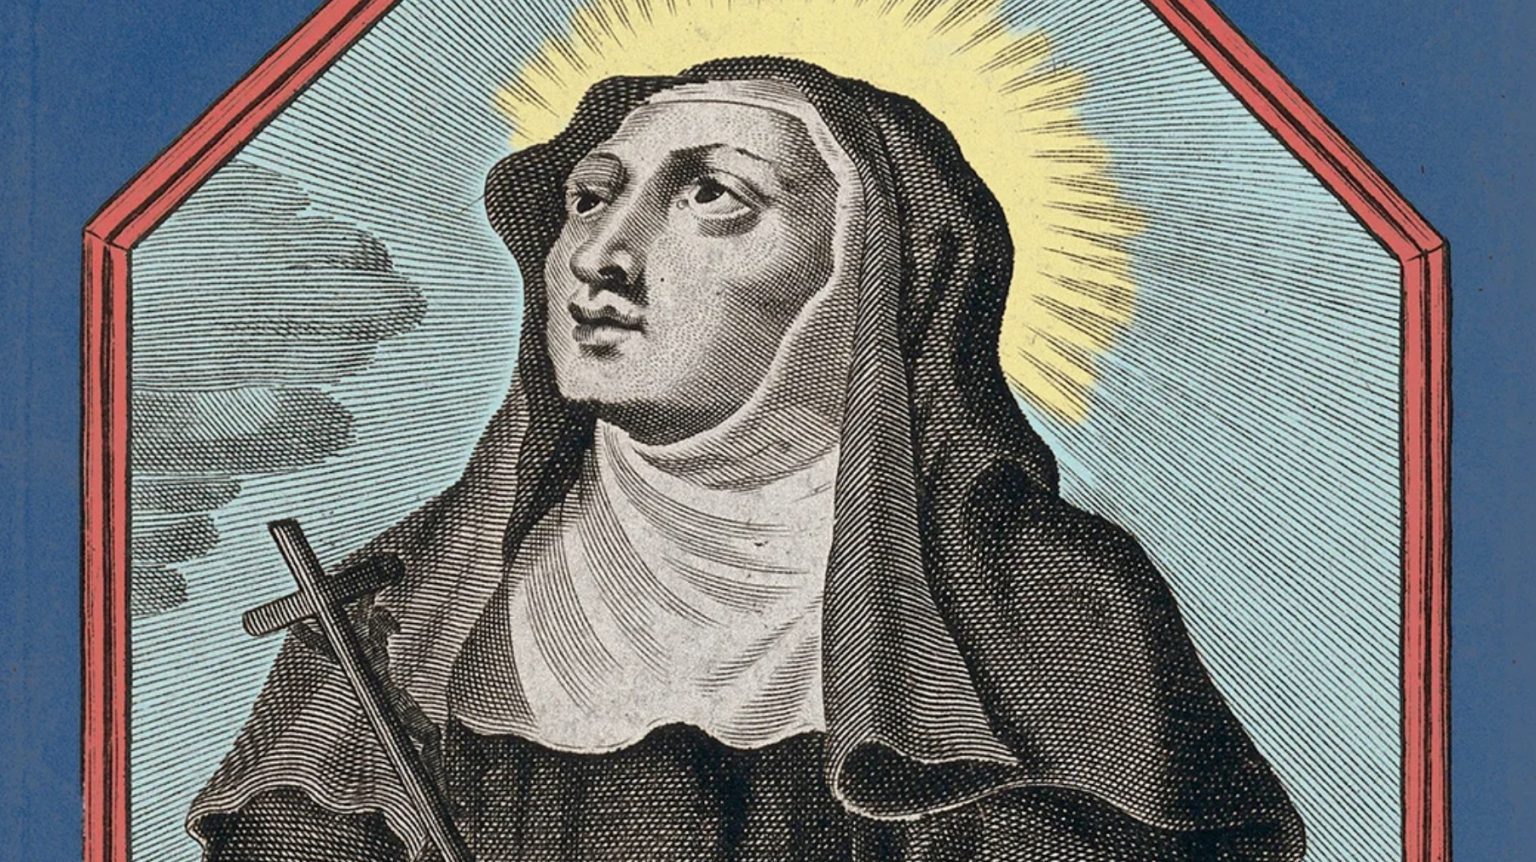 An old illustration of a nun holding a cross.